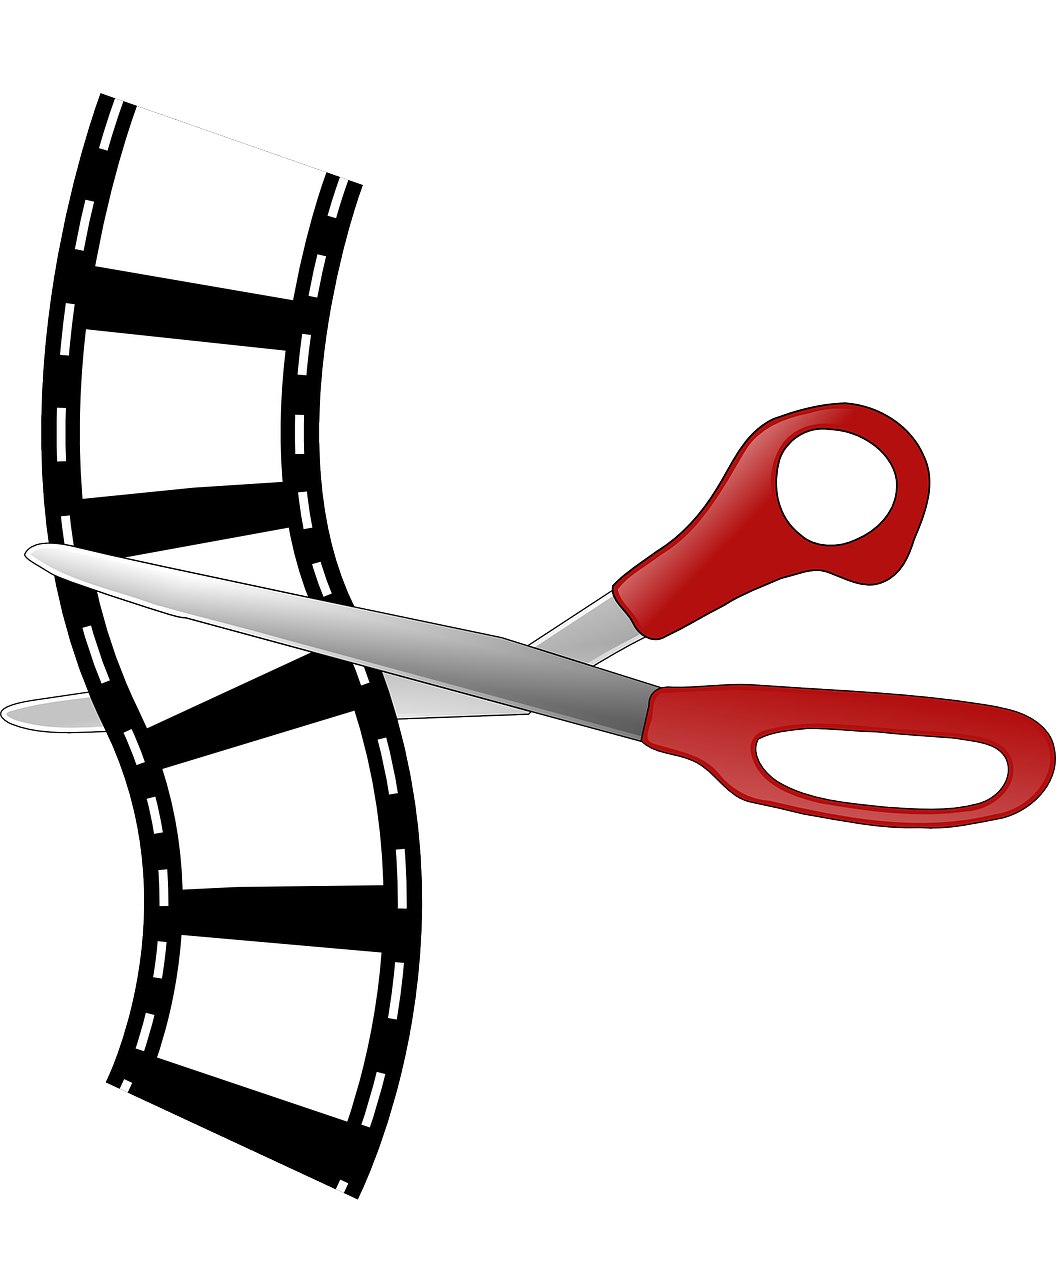 Video clipart video production. Seven innovative approaches to